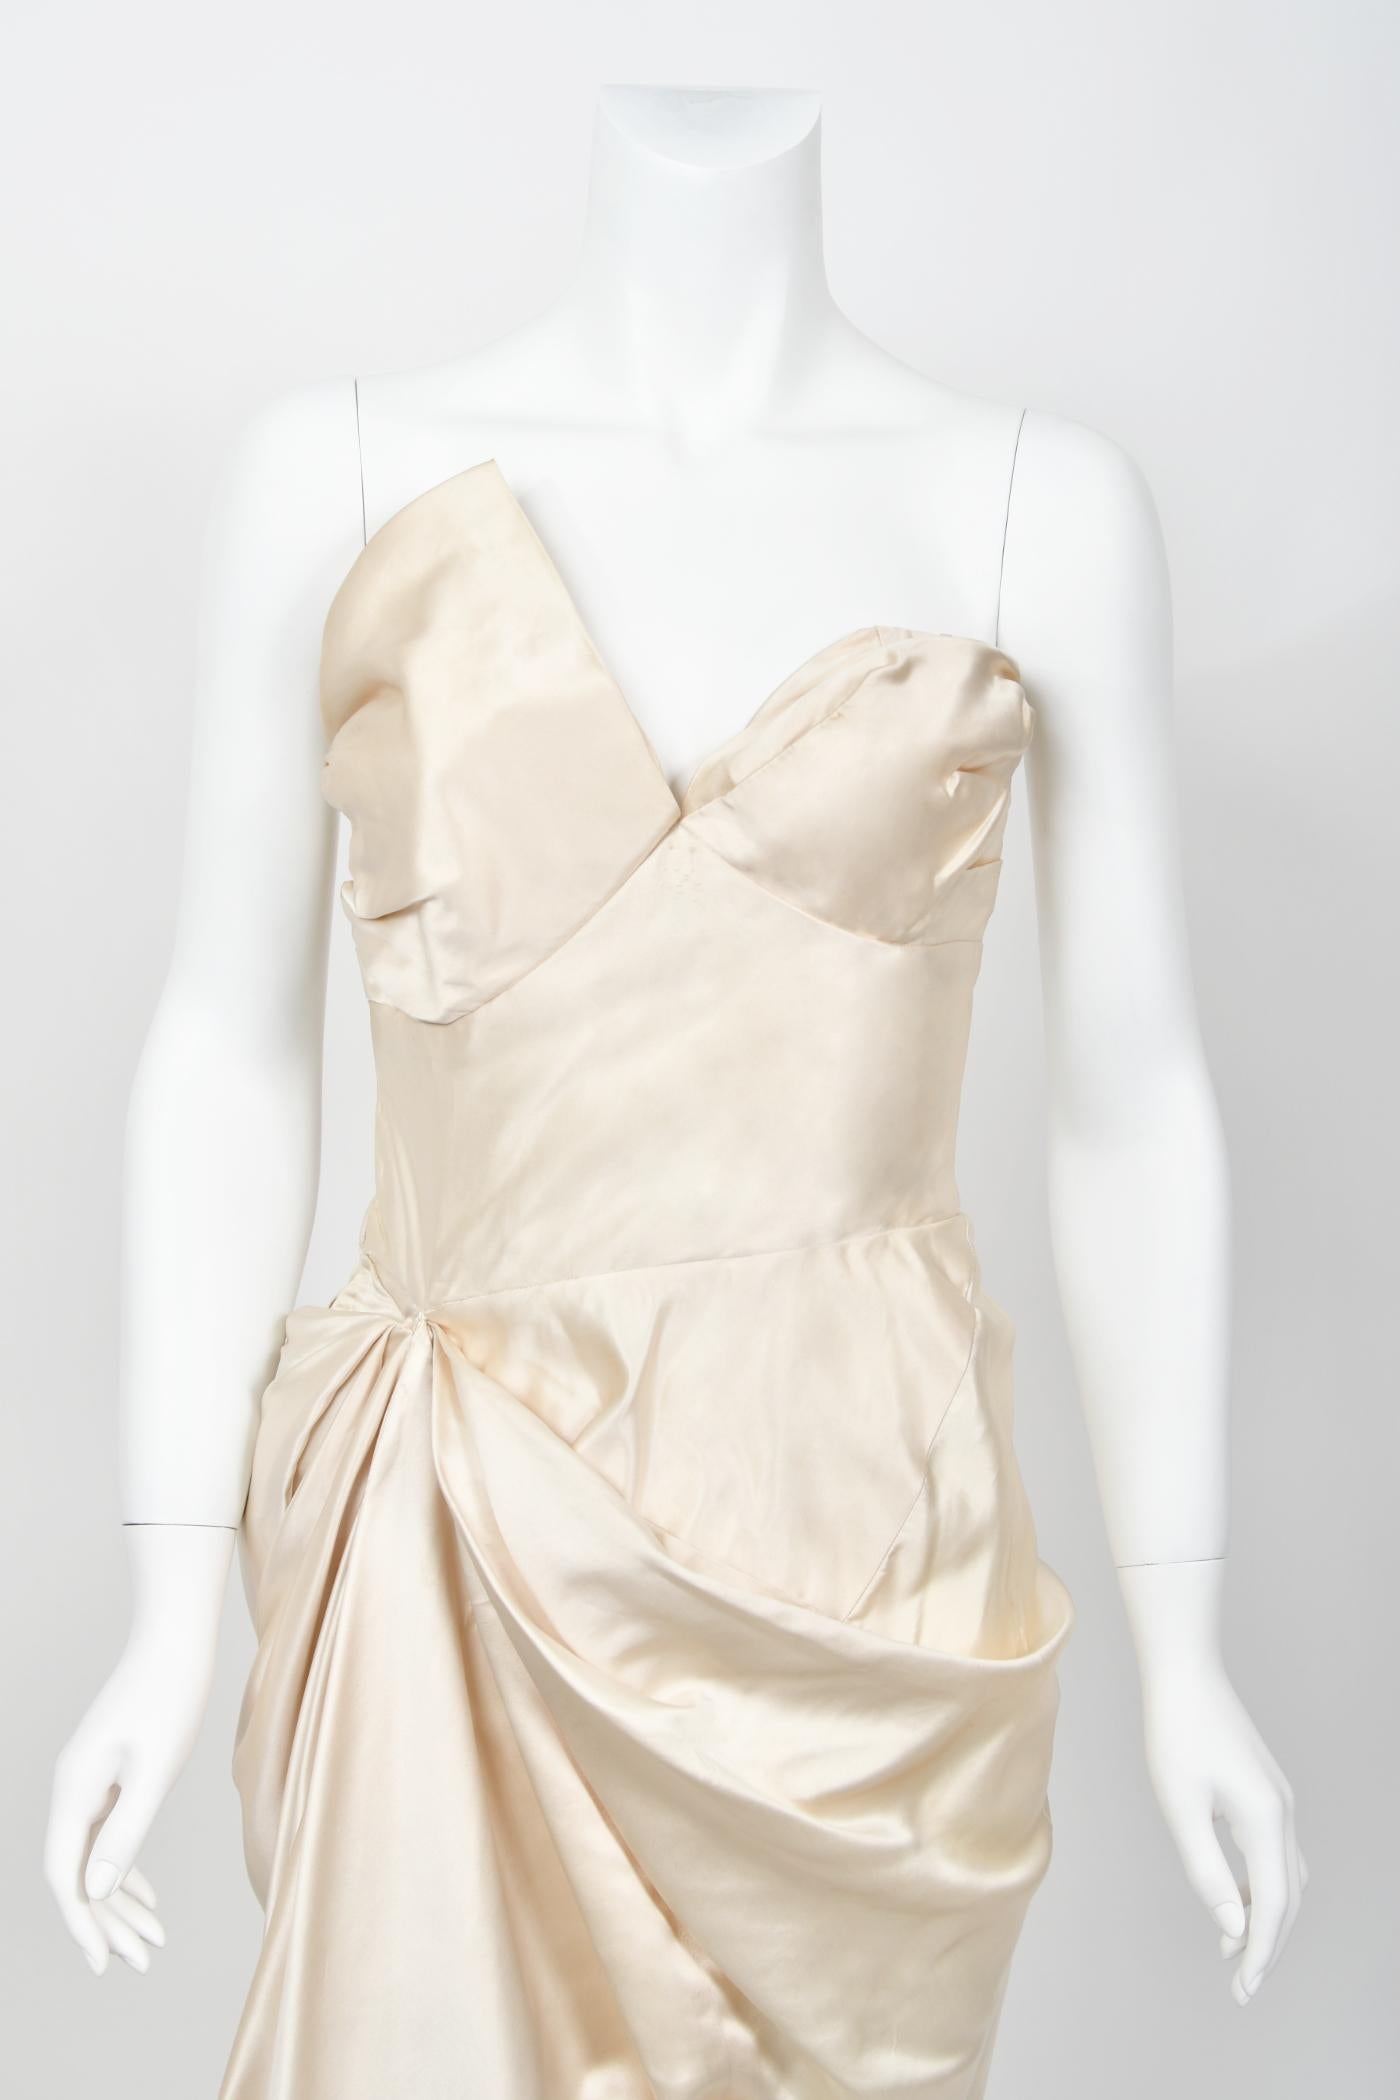 1949 Jeanne Lanvin Haute Couture Ivory Silk Satin Strapless Draped Bridal Gown  For Sale 3